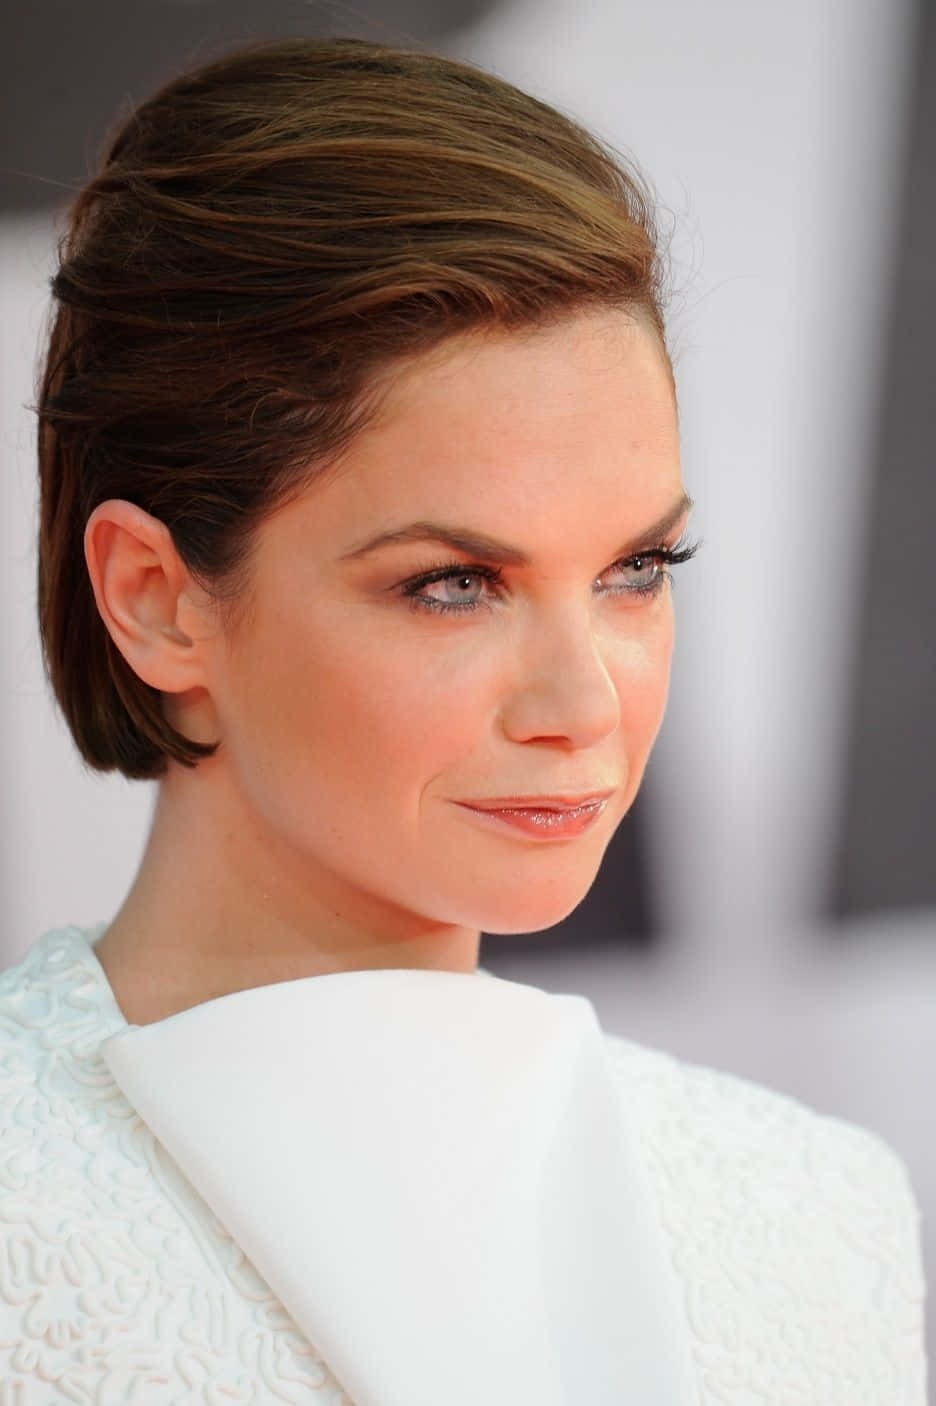 "british Actress Ruth Wilson Glowing At A Red Carpet Event" Wallpaper